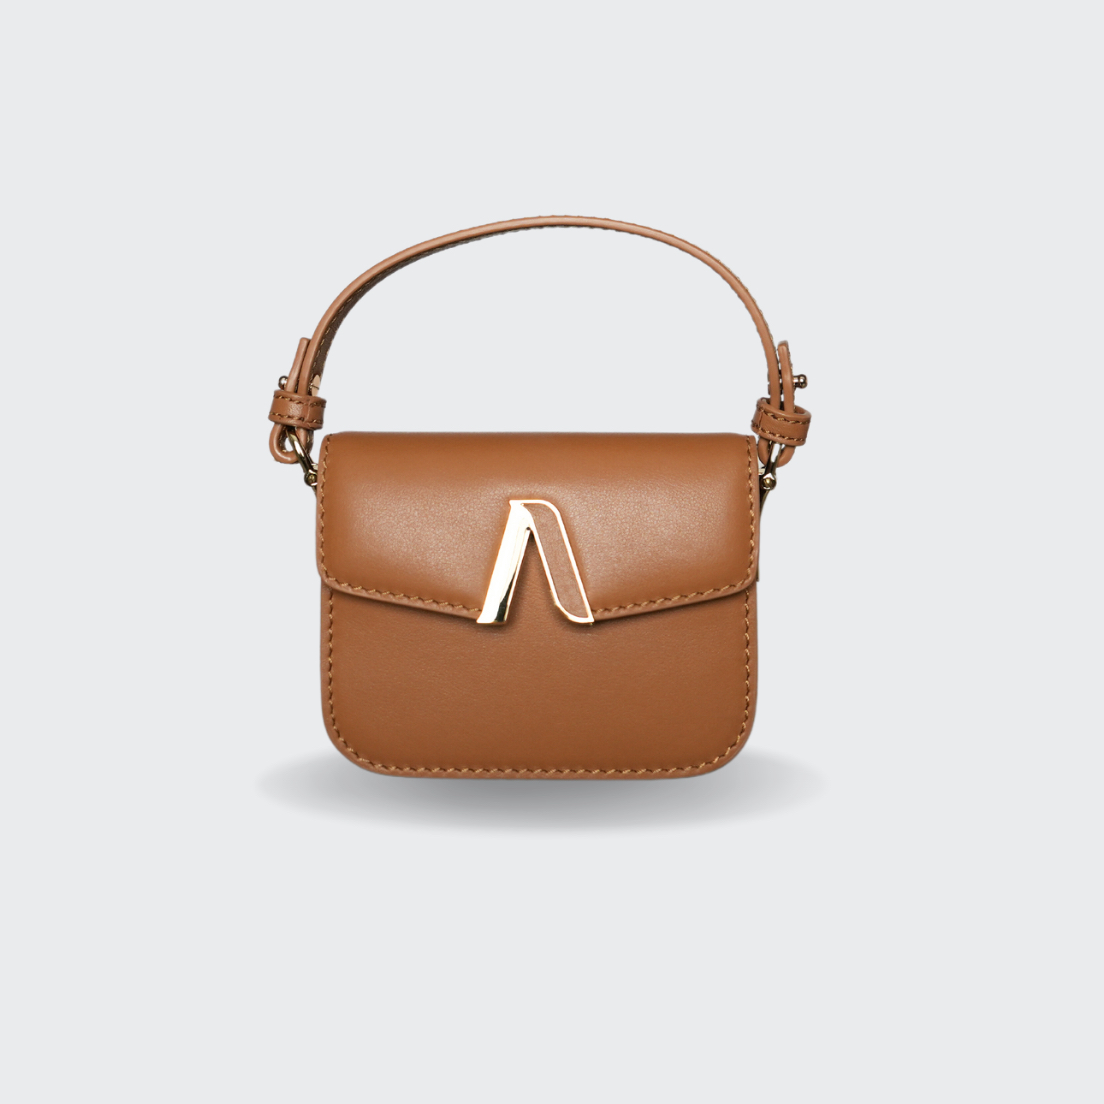 , 3 reasons to own a luxury bag from Singapore-based brand Abara